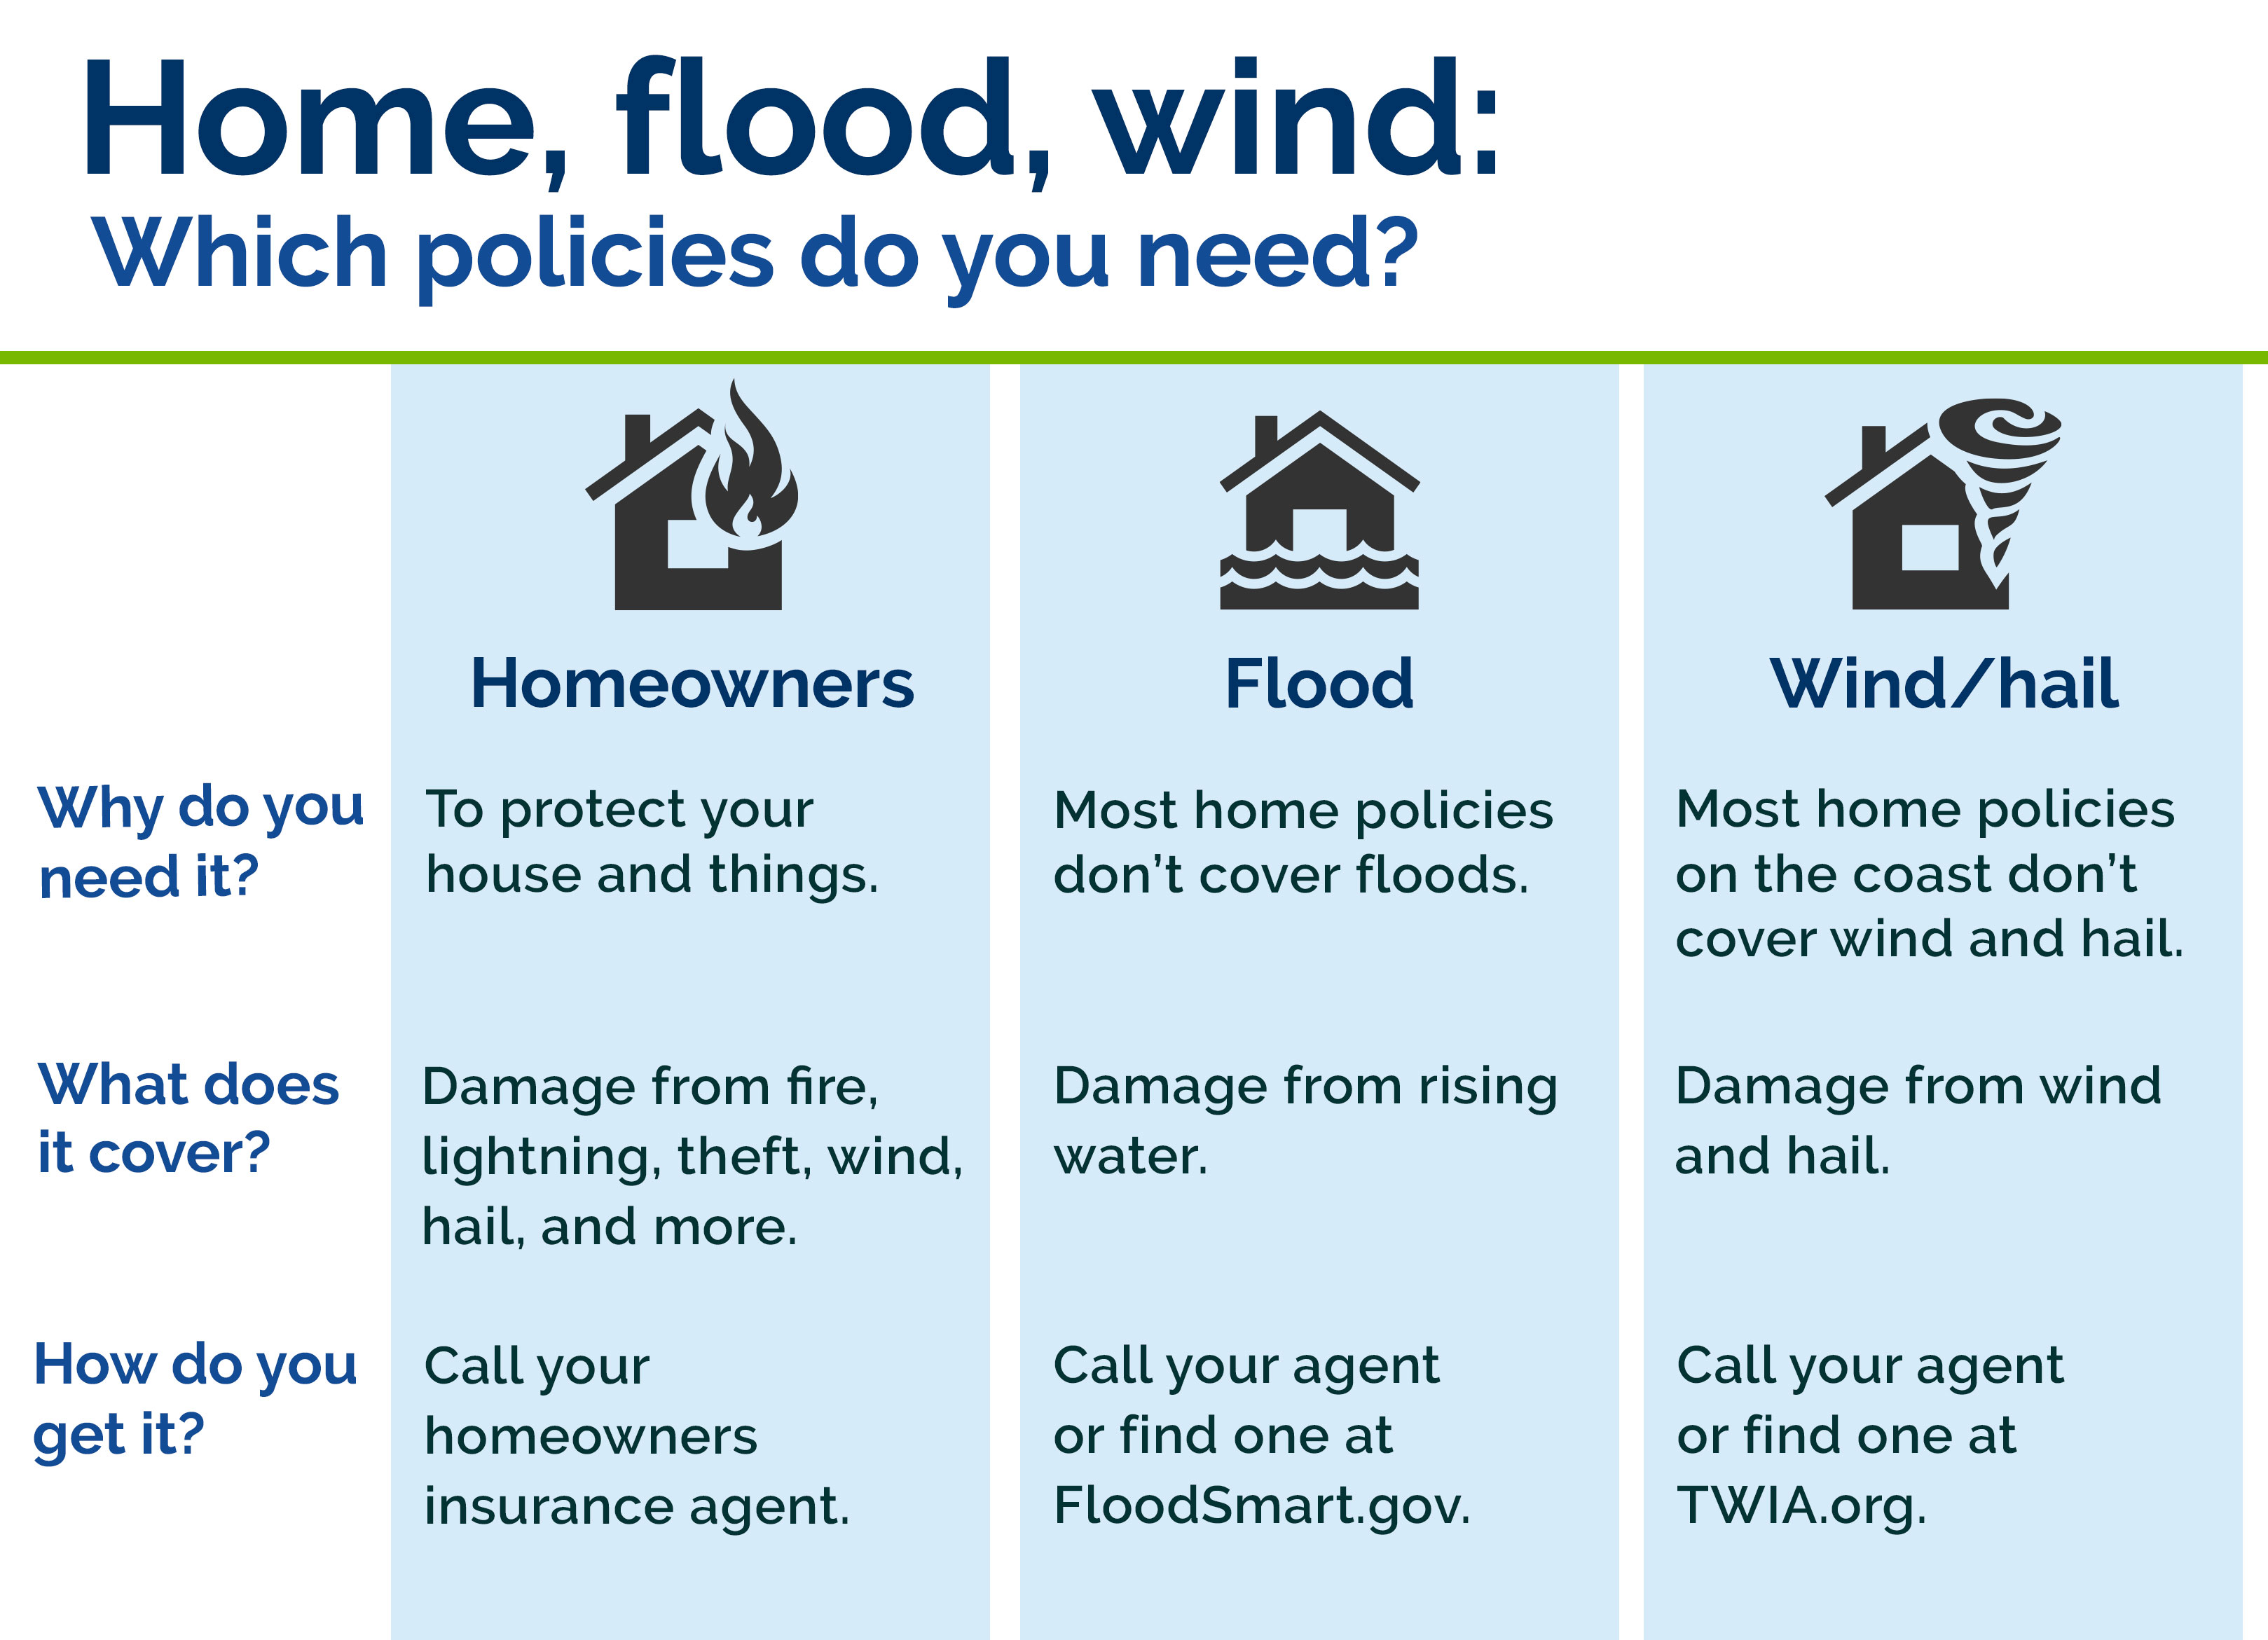 Home, flood, wind: which policies do you need?